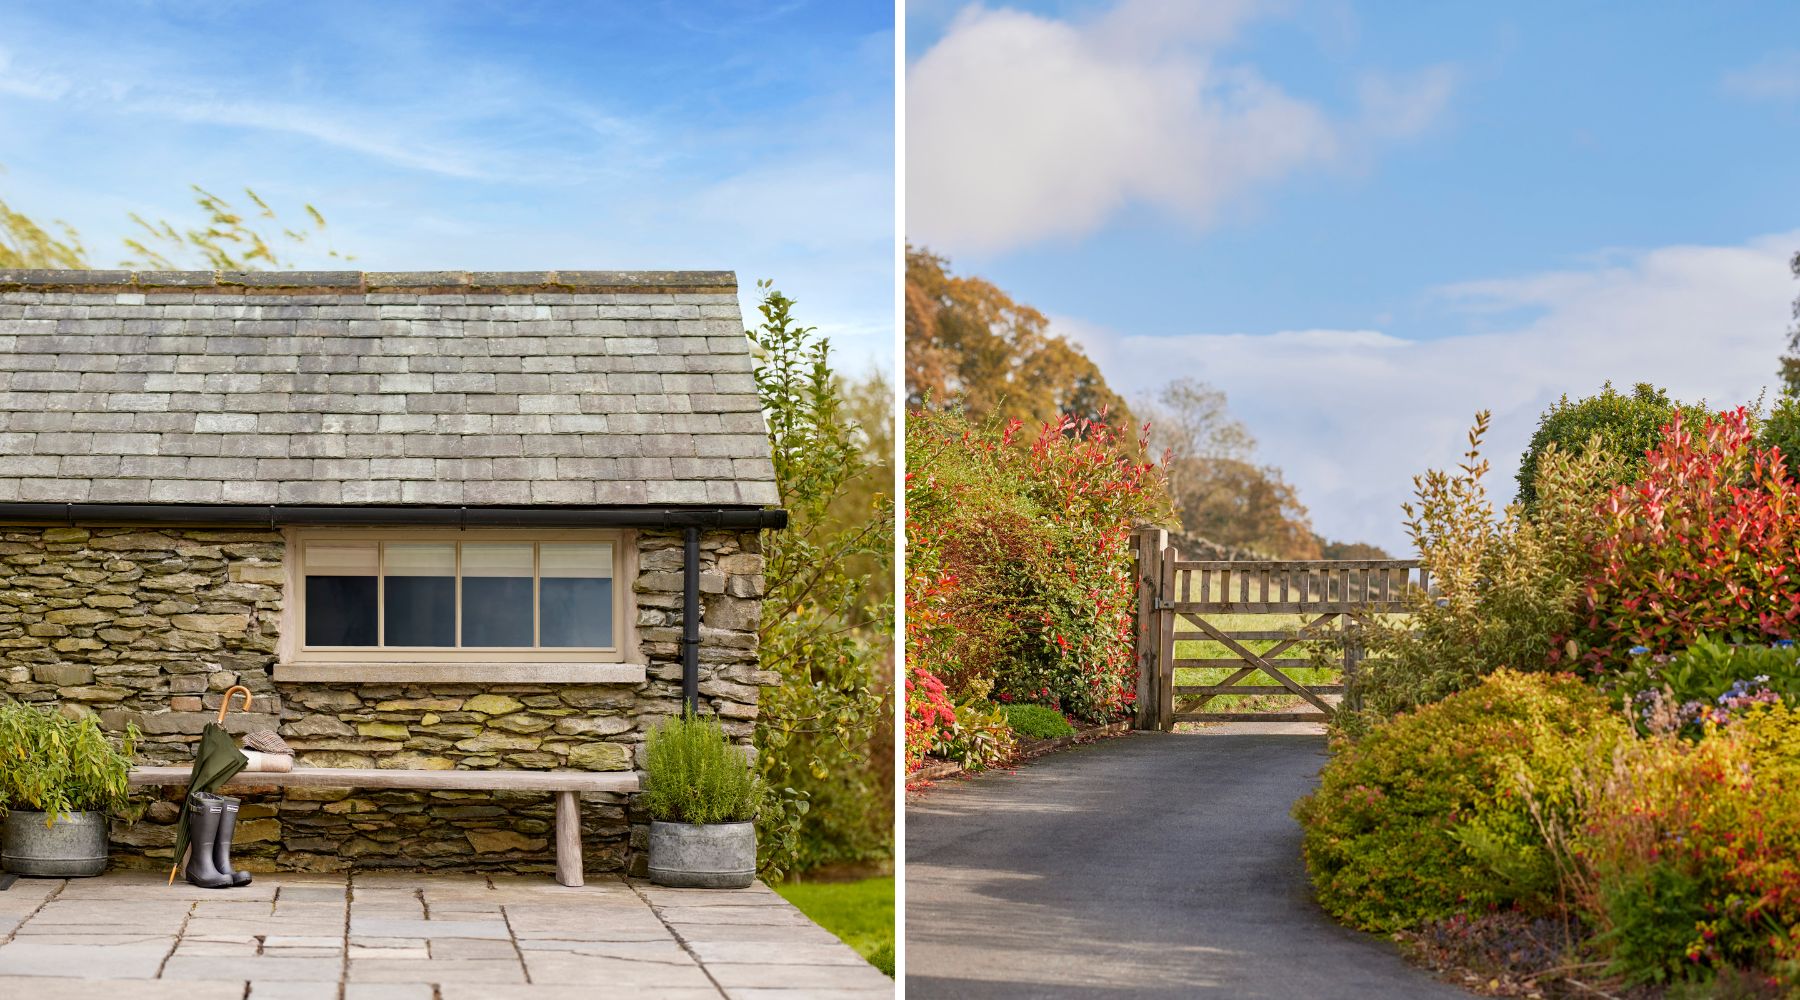 Omaze Million Pound House Lake District - stone annex with black wellies outside. Garden gate in the sun surrounded by country style garden